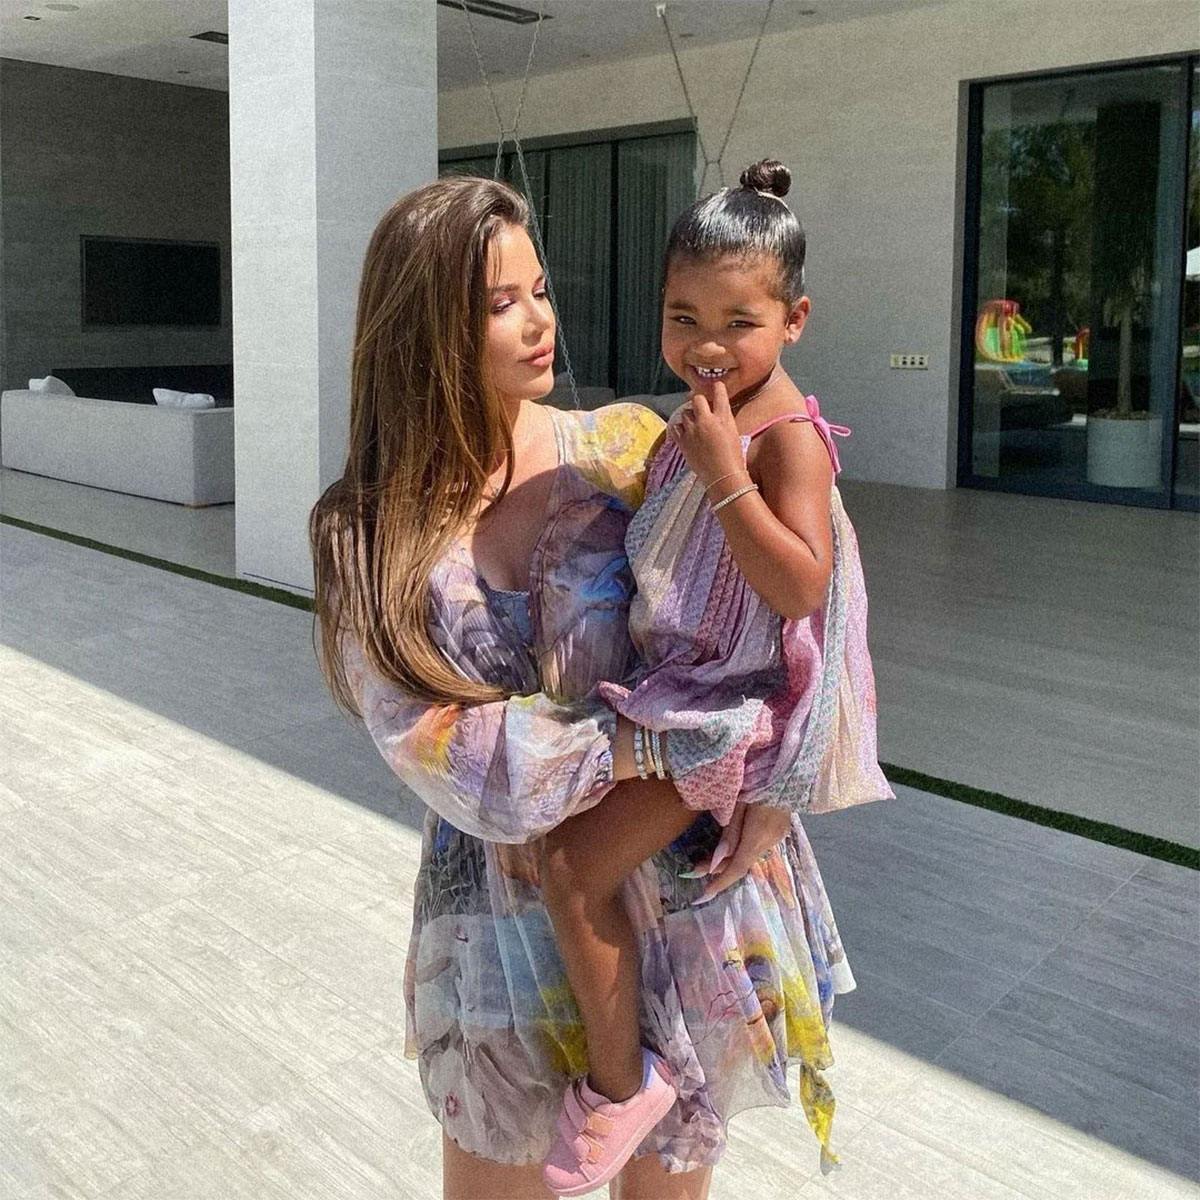 Khloe Kardashian Opens Up About Not Feeling Lonely as a Single Mom